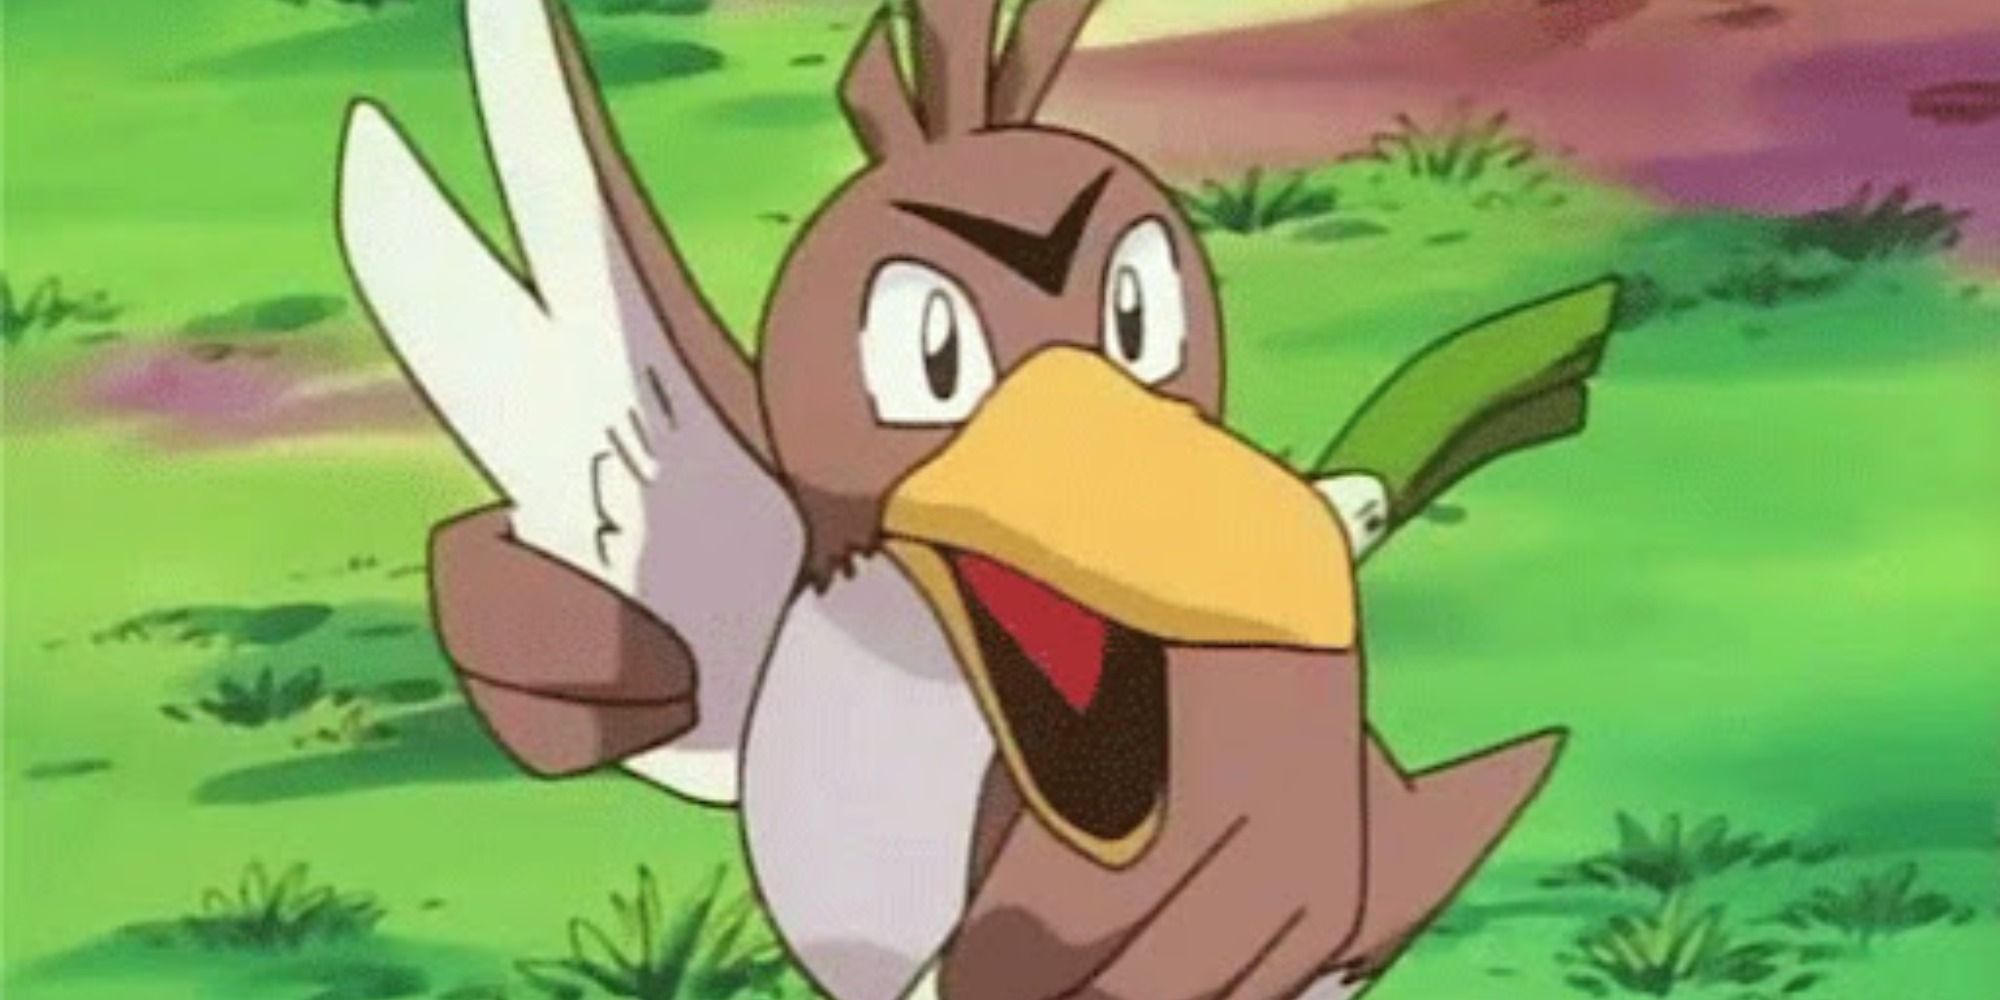 A happy Farfetch'd from the Pokemon Anime giving the peace sign.